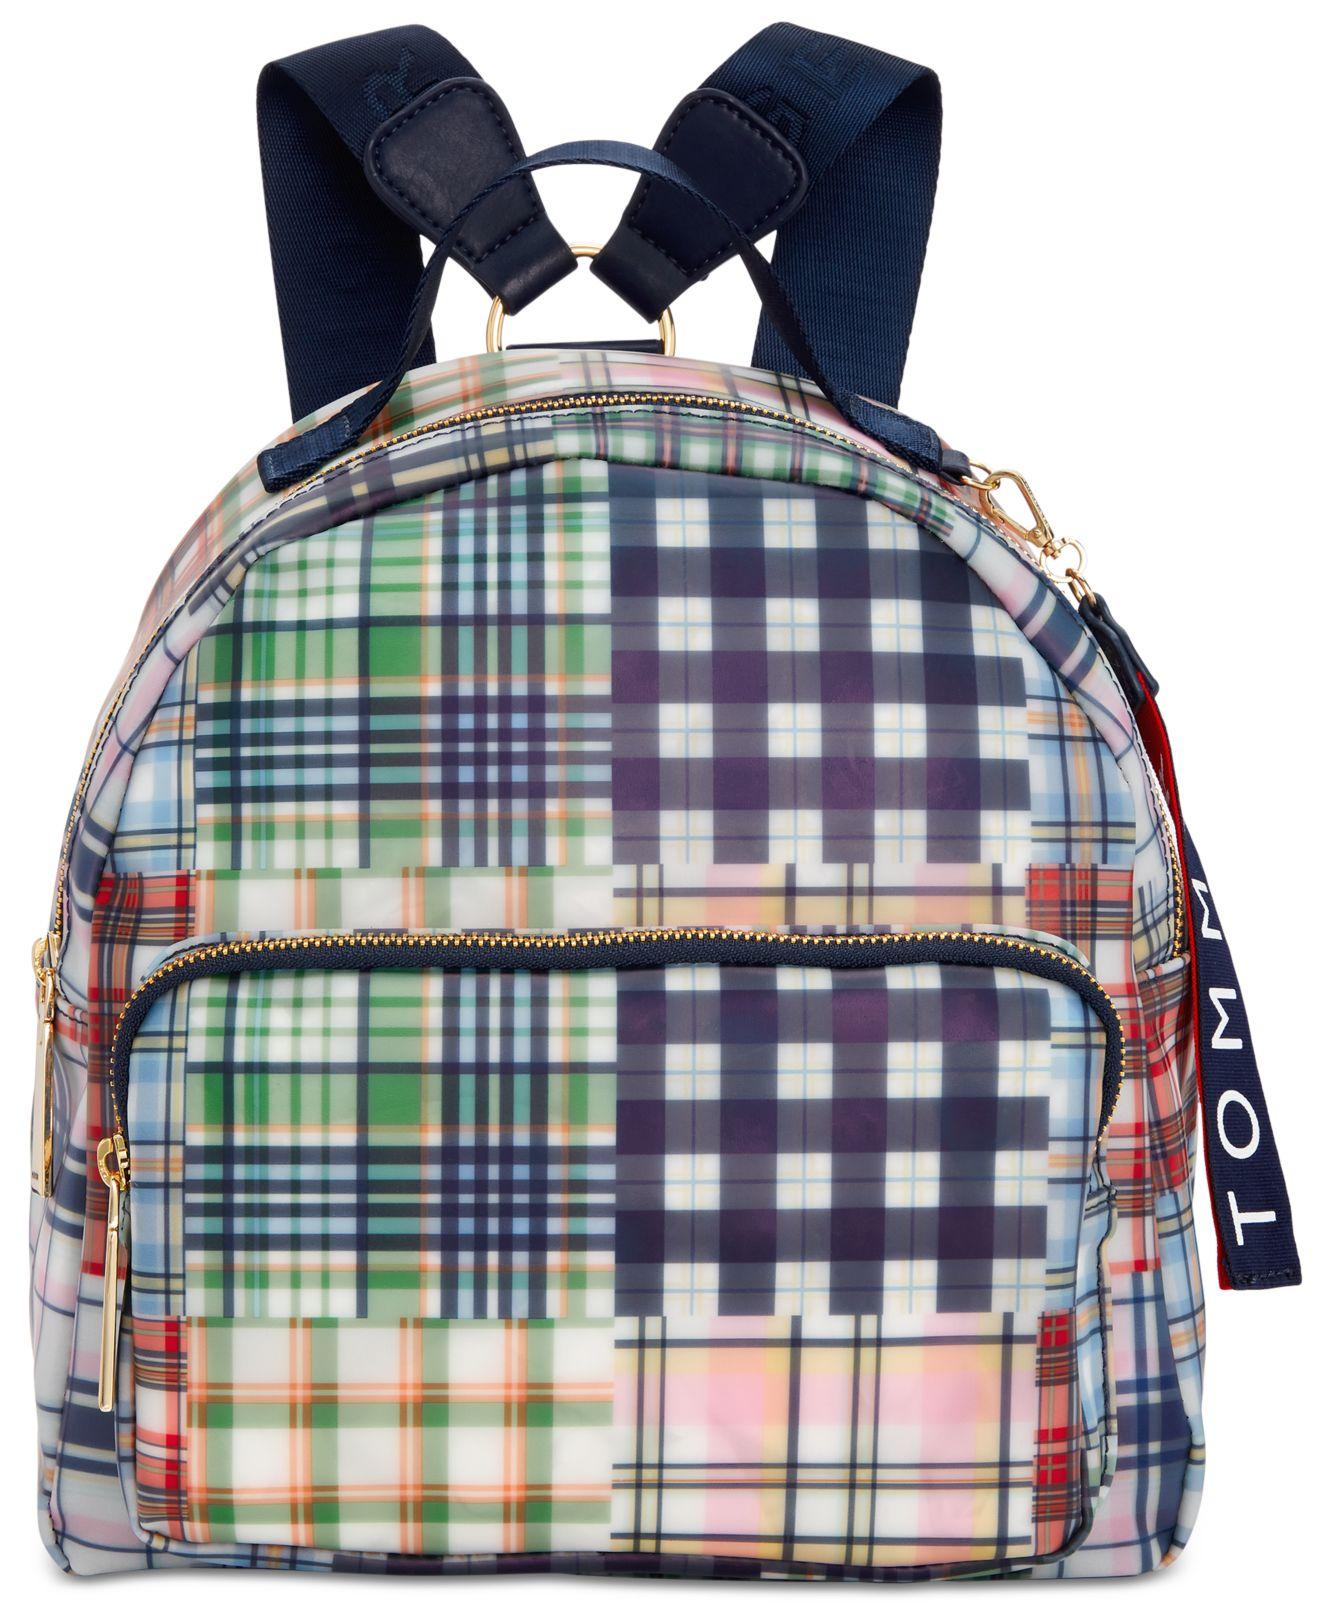 Tommy Hilfiger Checkered Backpack Clearance, SAVE 50%.